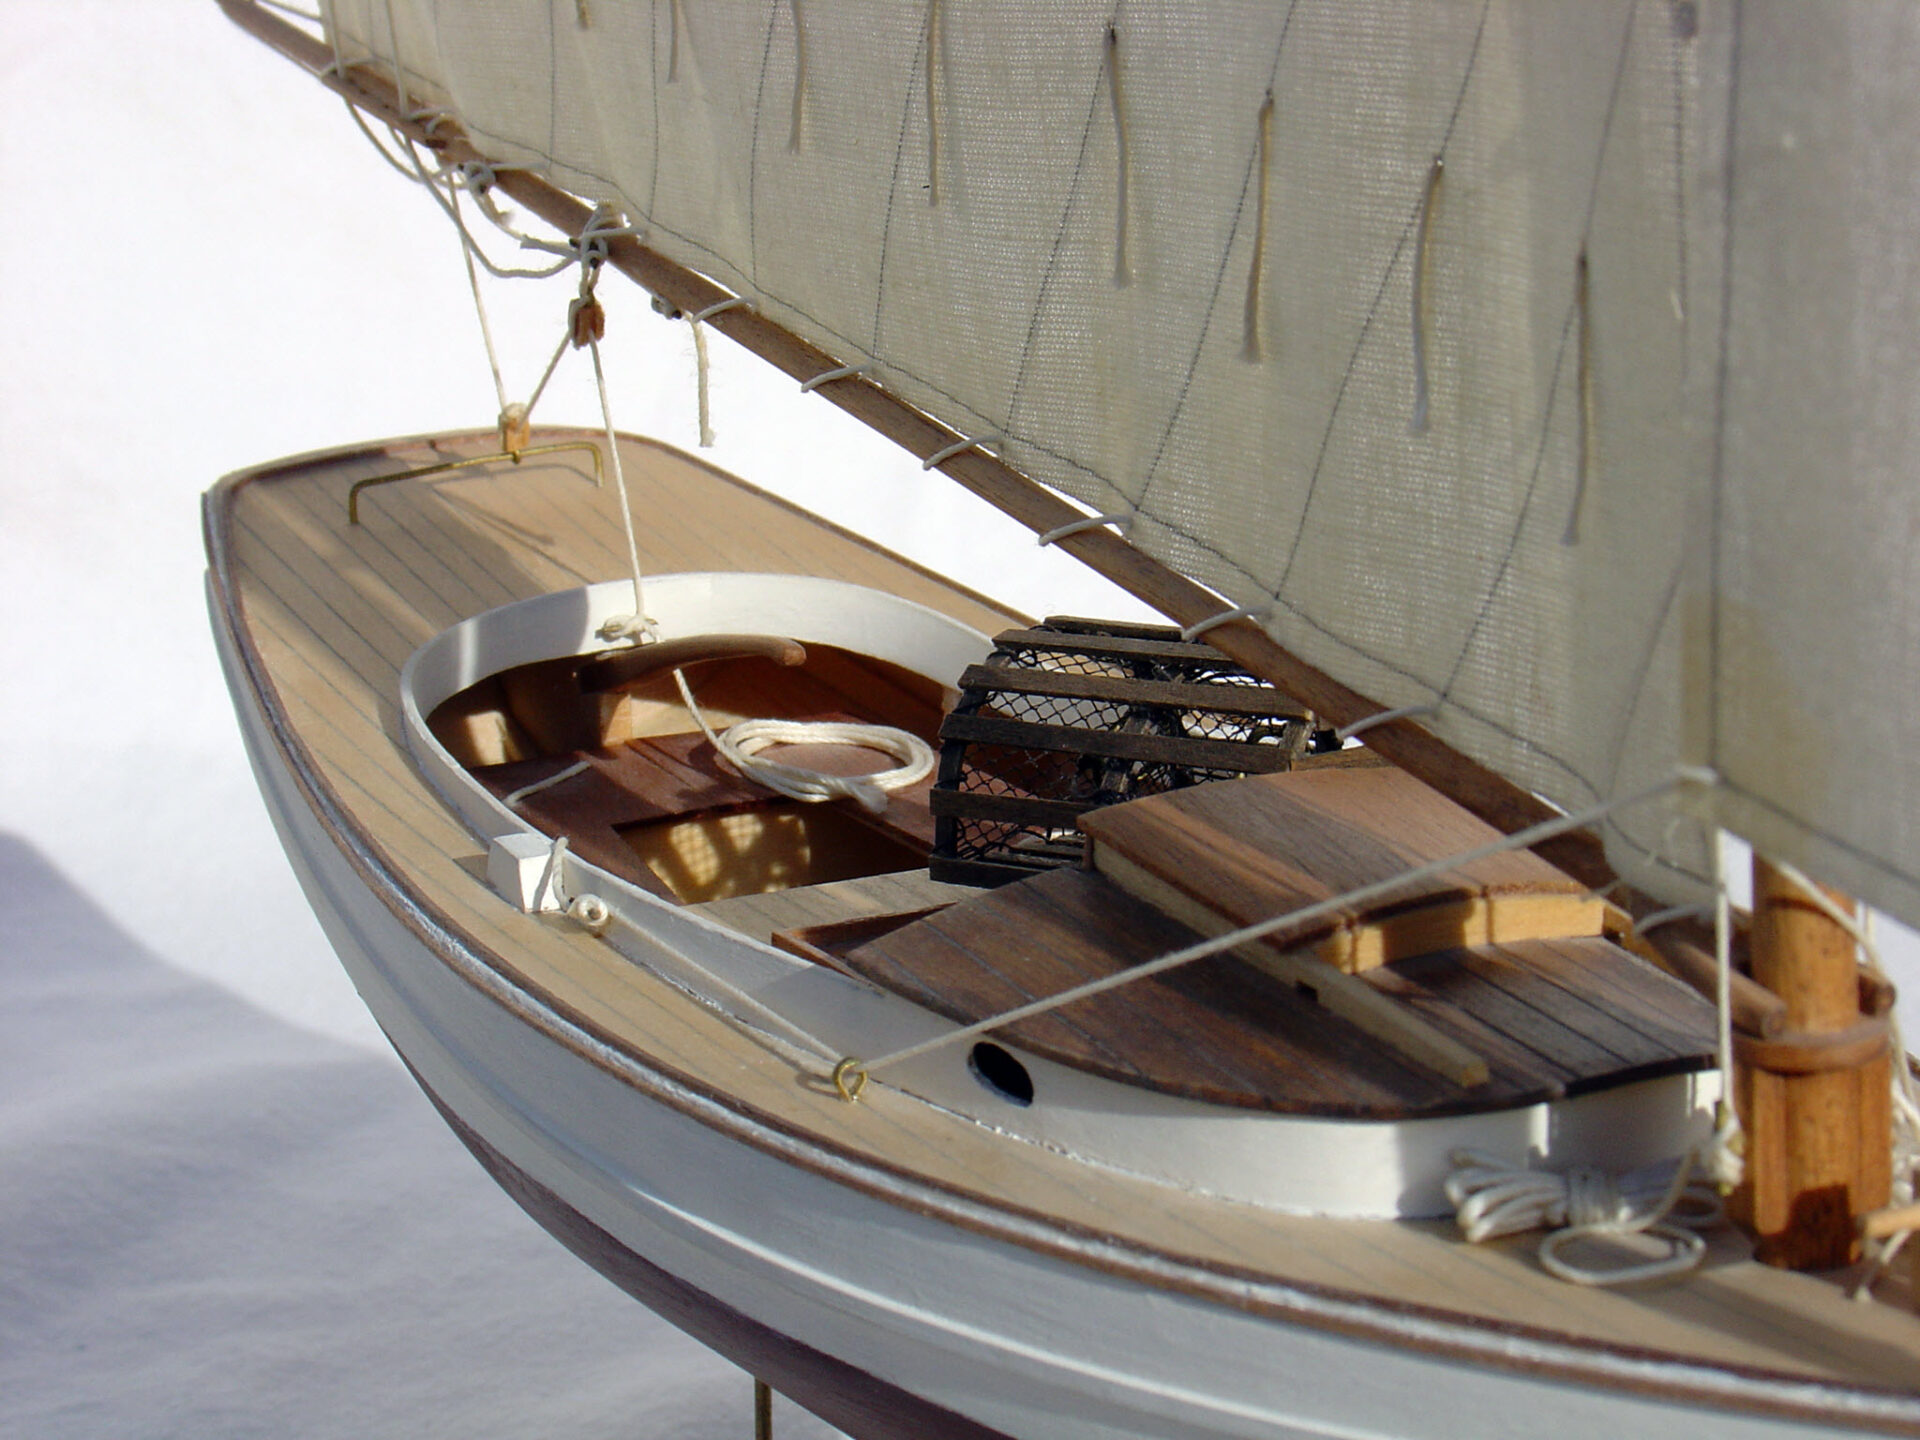 Model of a Muscongus Bay lobster smack - View of deck, aft of the mast, from starboard bow